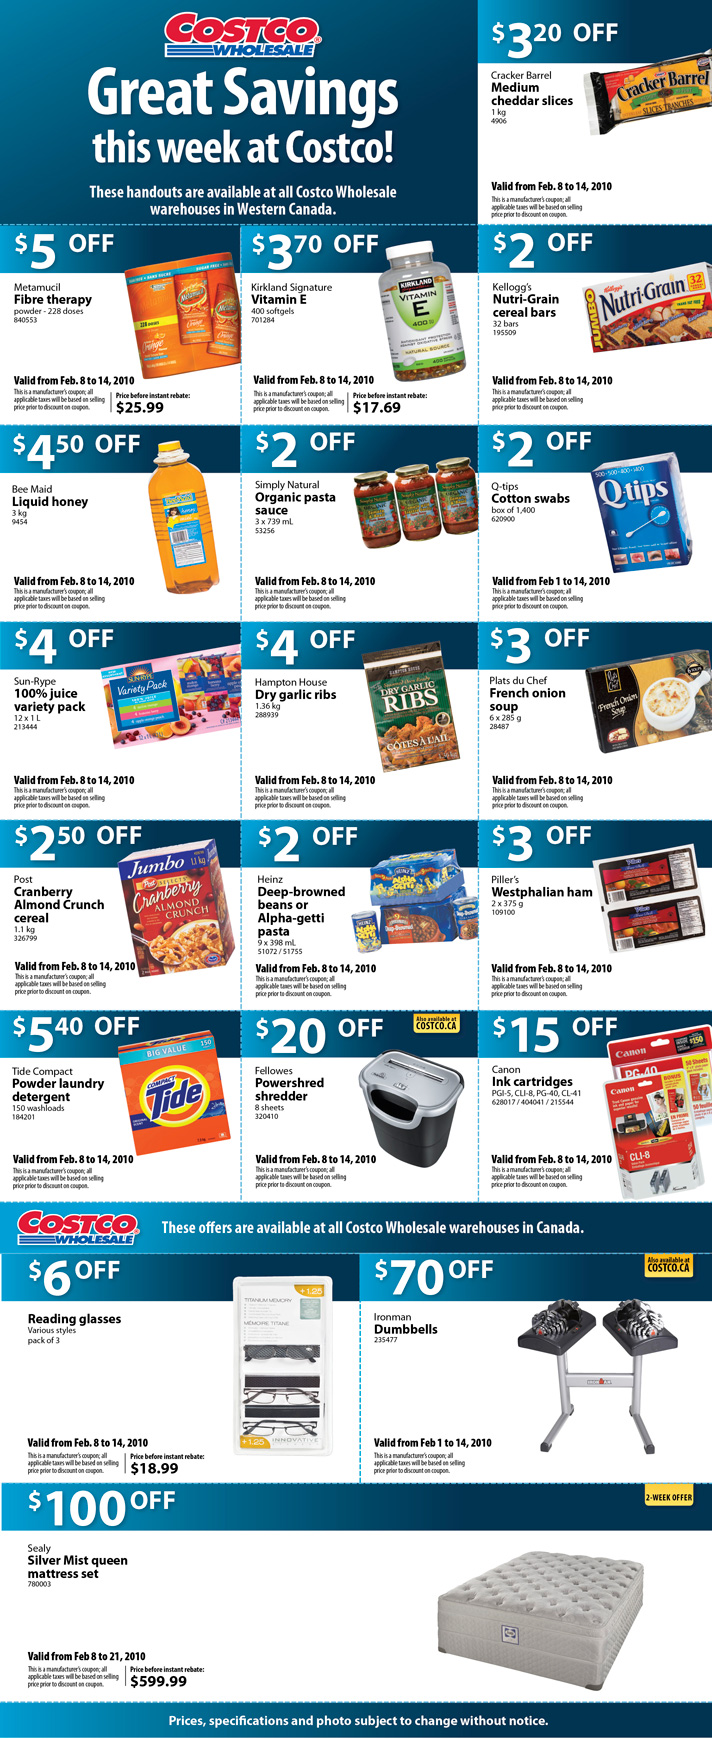 costco-instant-savings-coupons-feb-8-14-2010-canadian-freebies